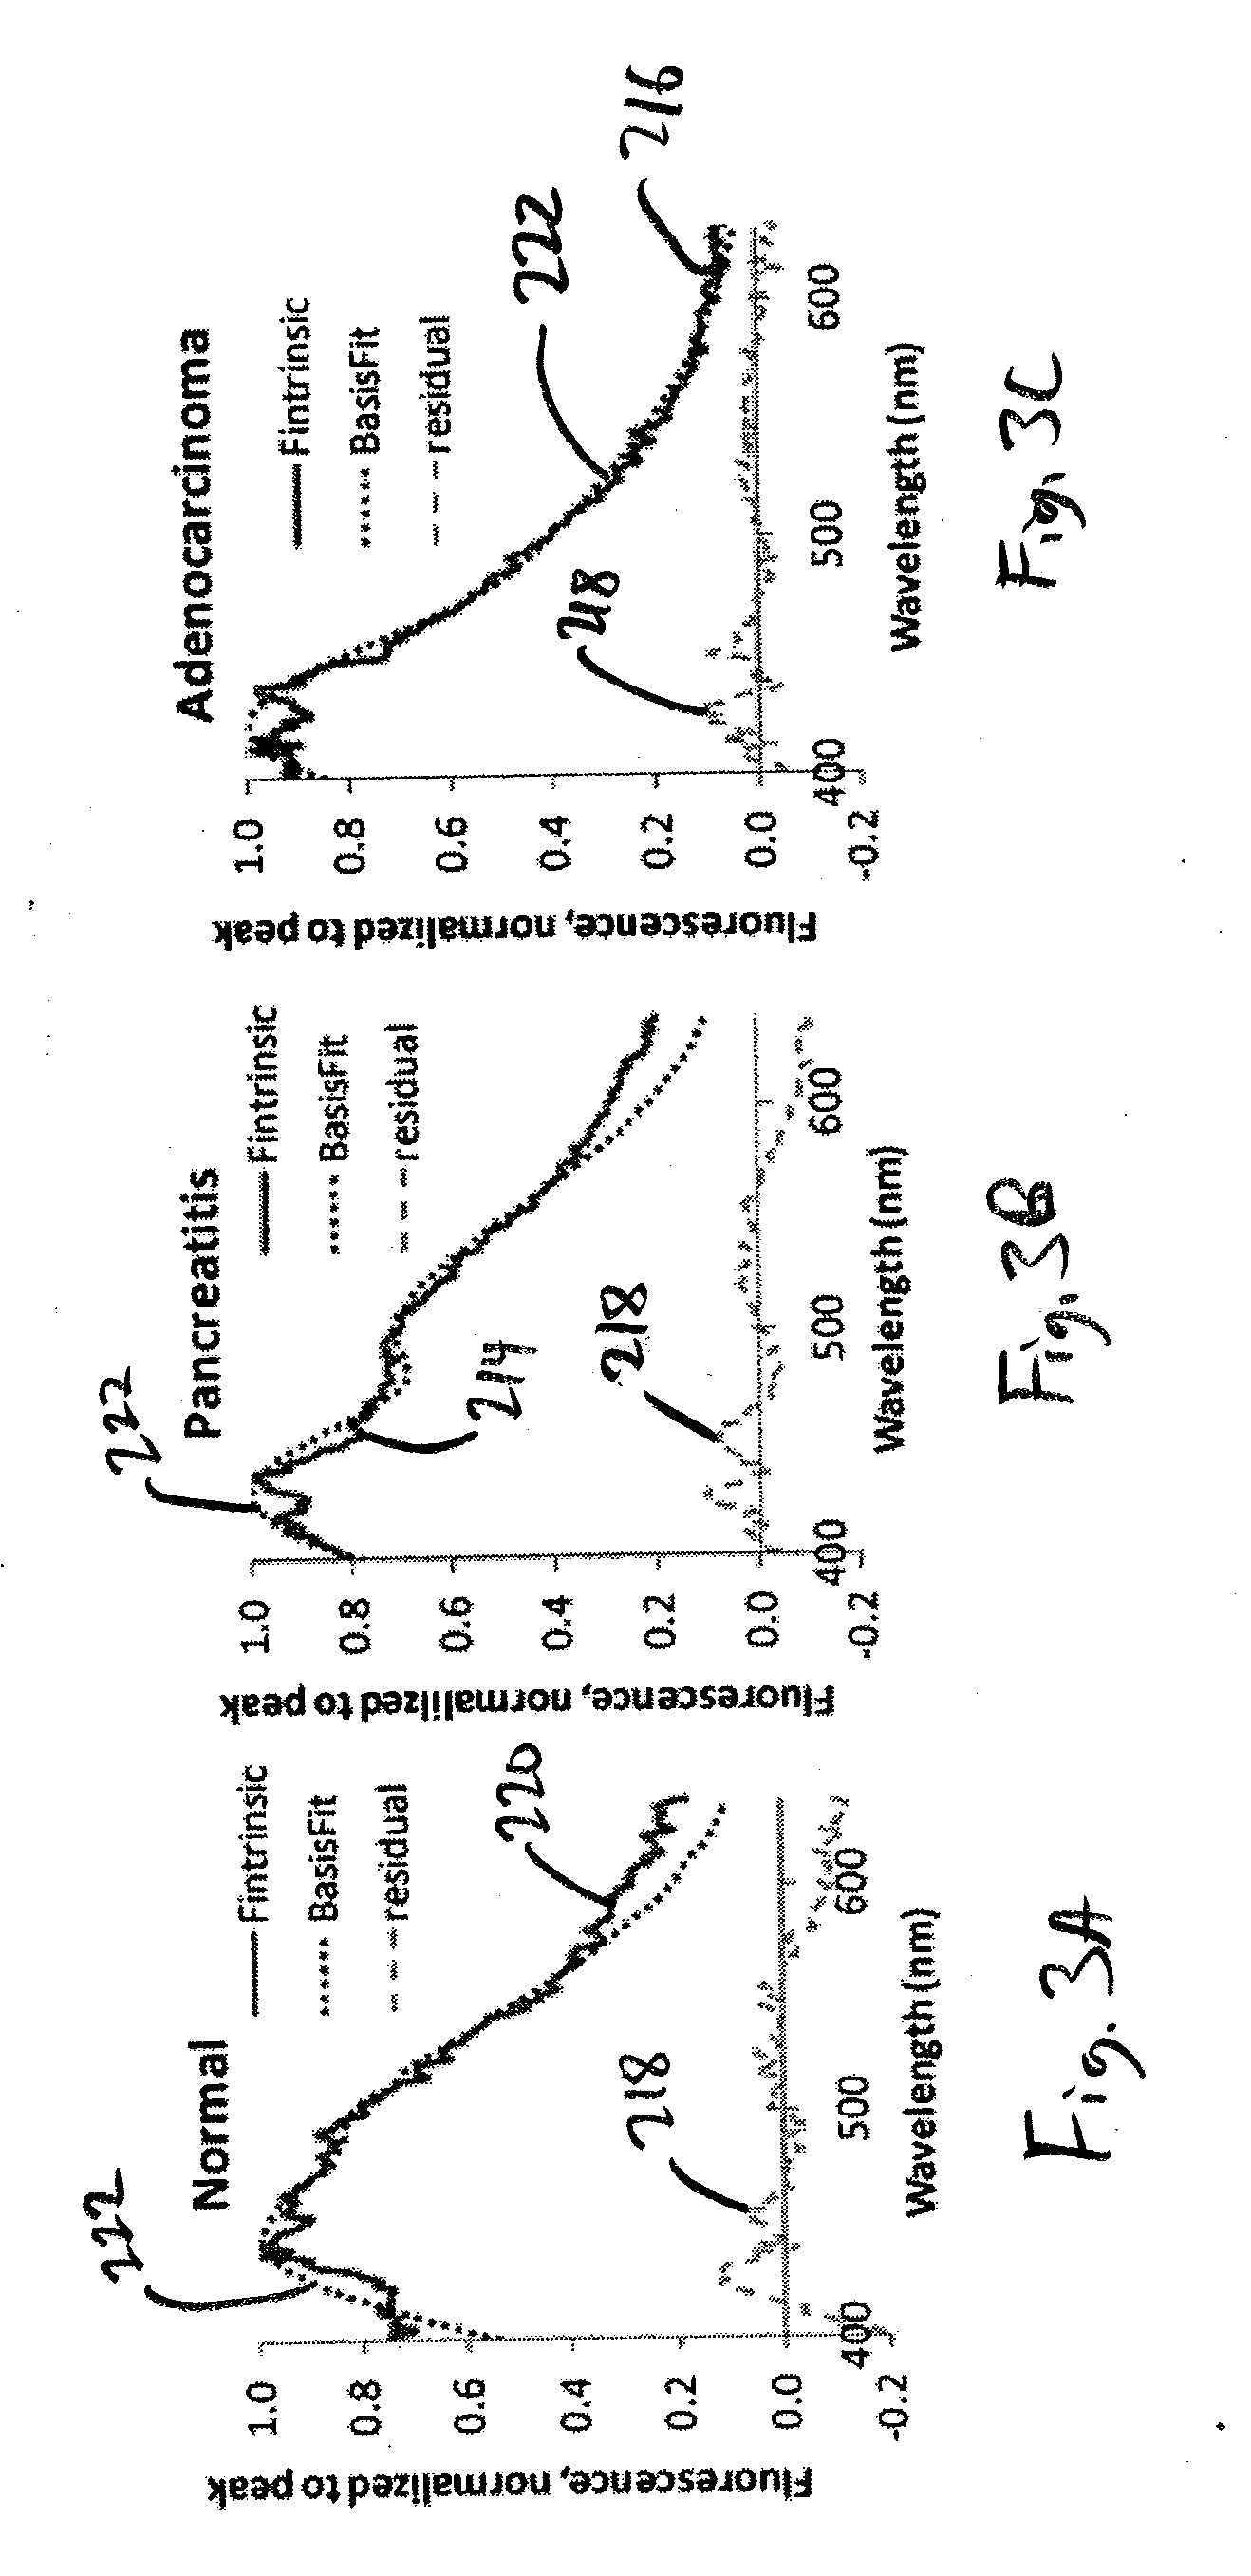 Multimodal Spectroscopic Systems and Methods for Classifying Biological Tissue